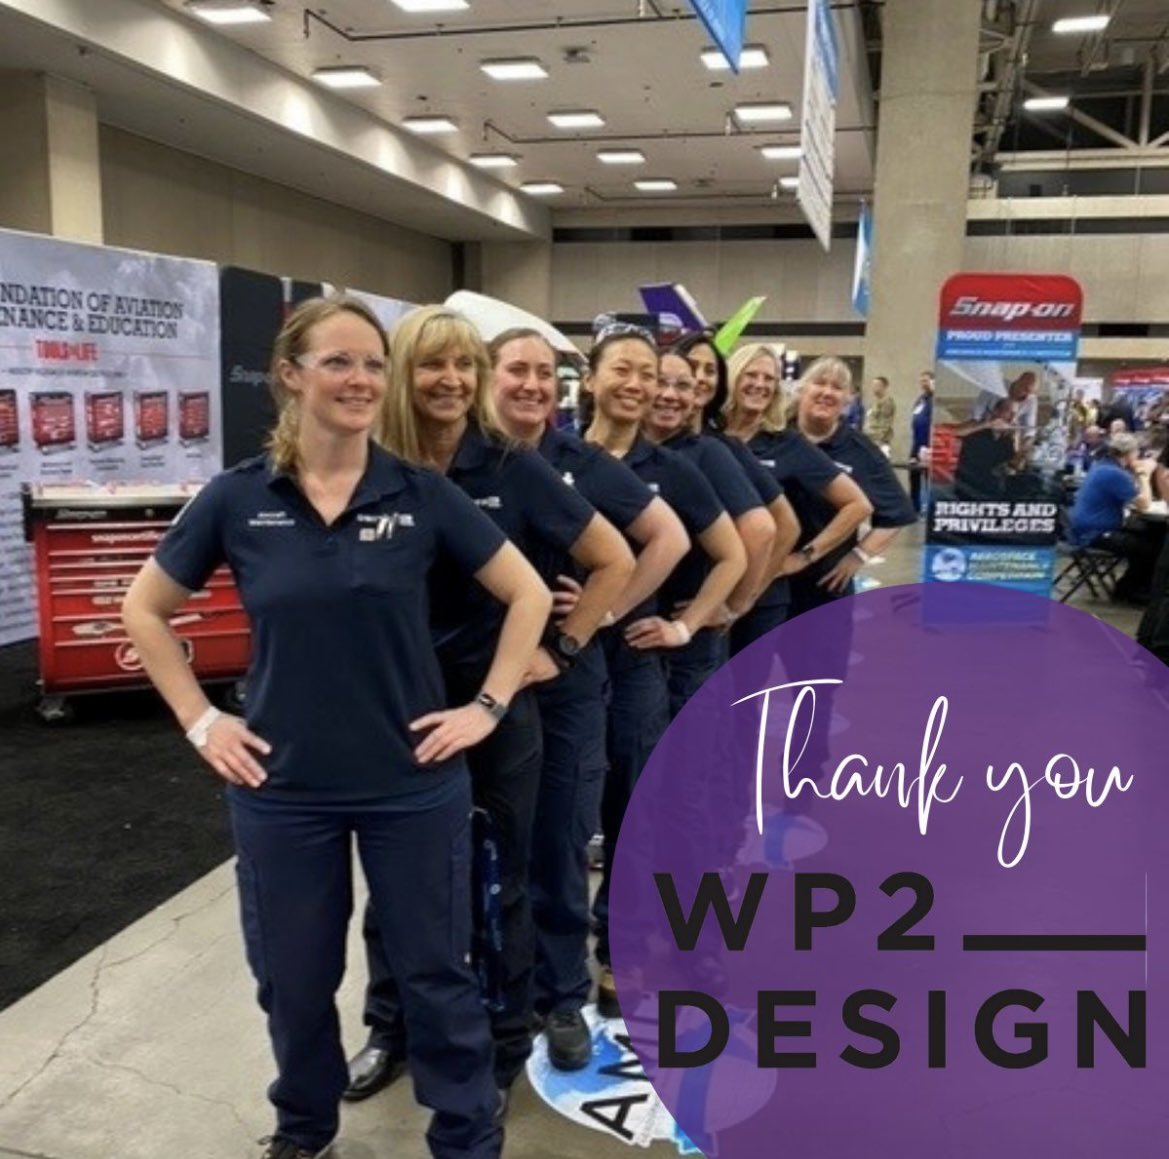 Thank you Willis Porter from #WP2Designs for your design work for our #501c3nonprofit as we work to make our 3rd annual  #jobfAIR at #MROAM another huge success!

#Aviation #WomenInAviation #25by25 #DEI #WillisPorter